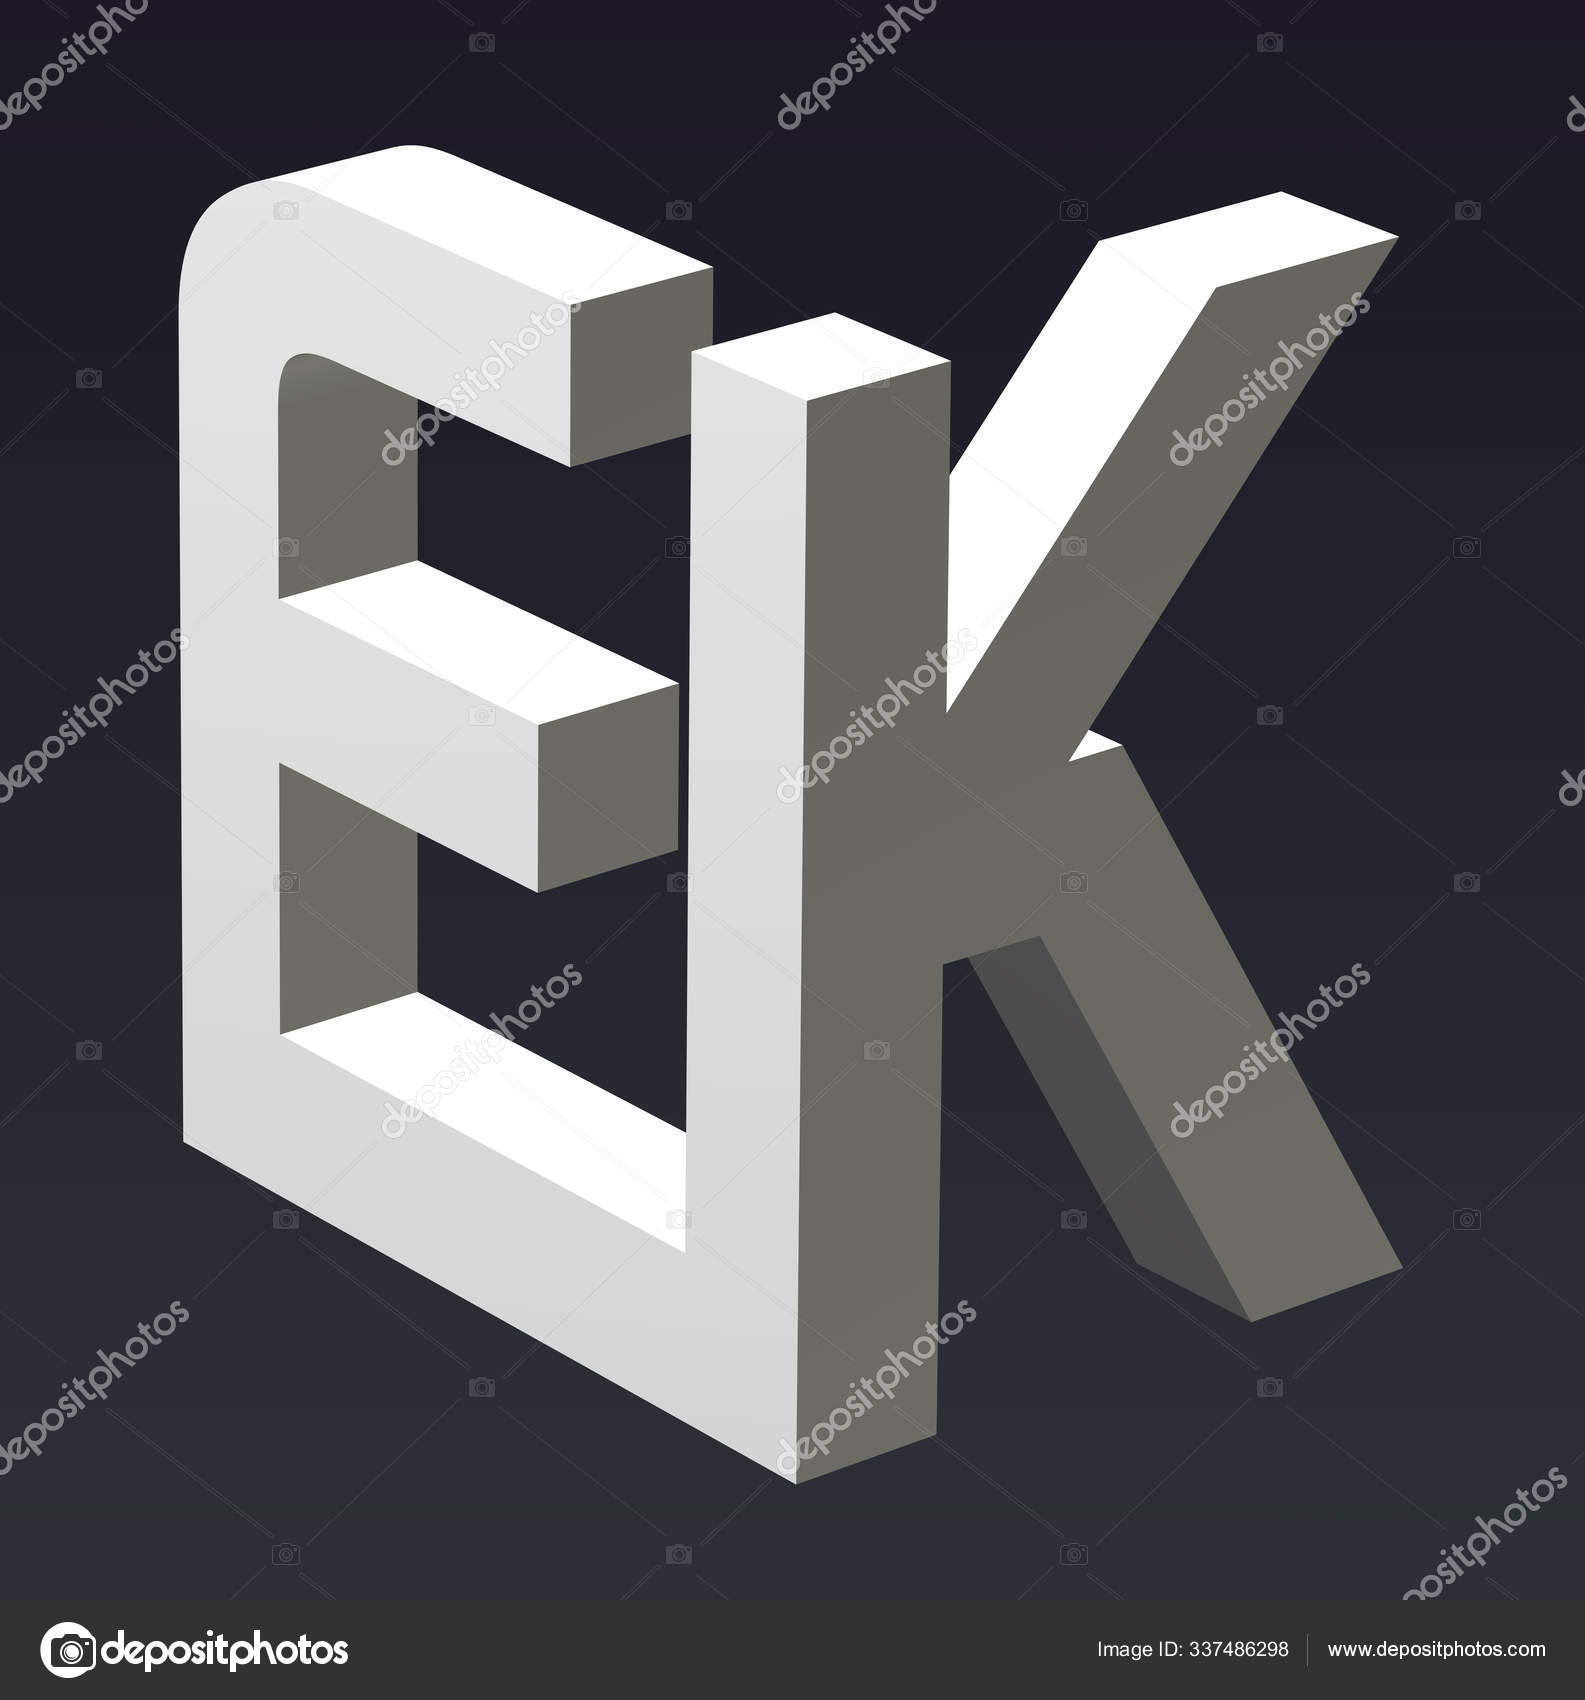 Font Stylization Letters Font Composition Logo Rendering Stock Photo Image By C 0123omar 337486298